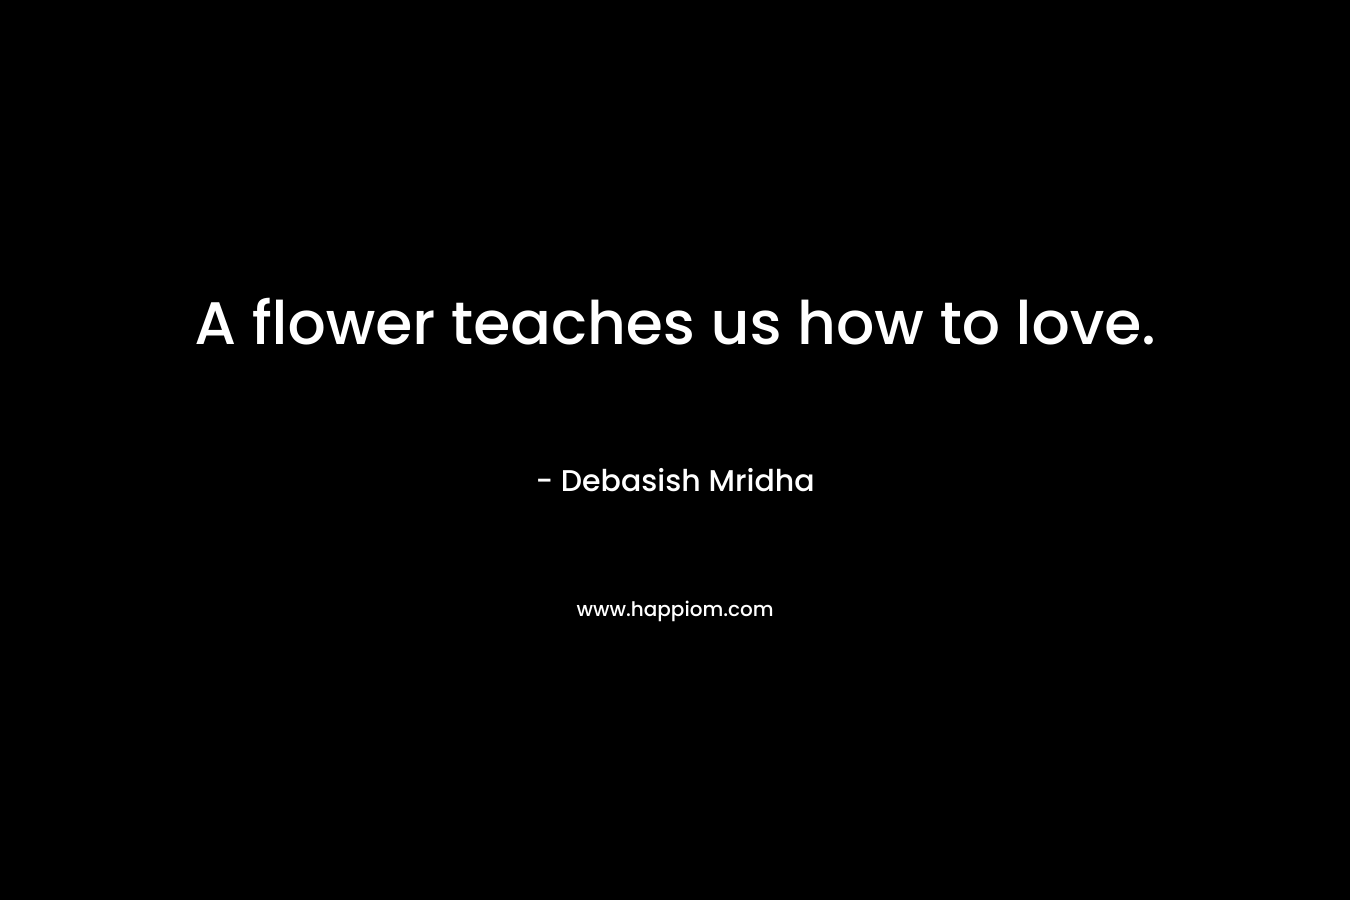 A flower teaches us how to love.